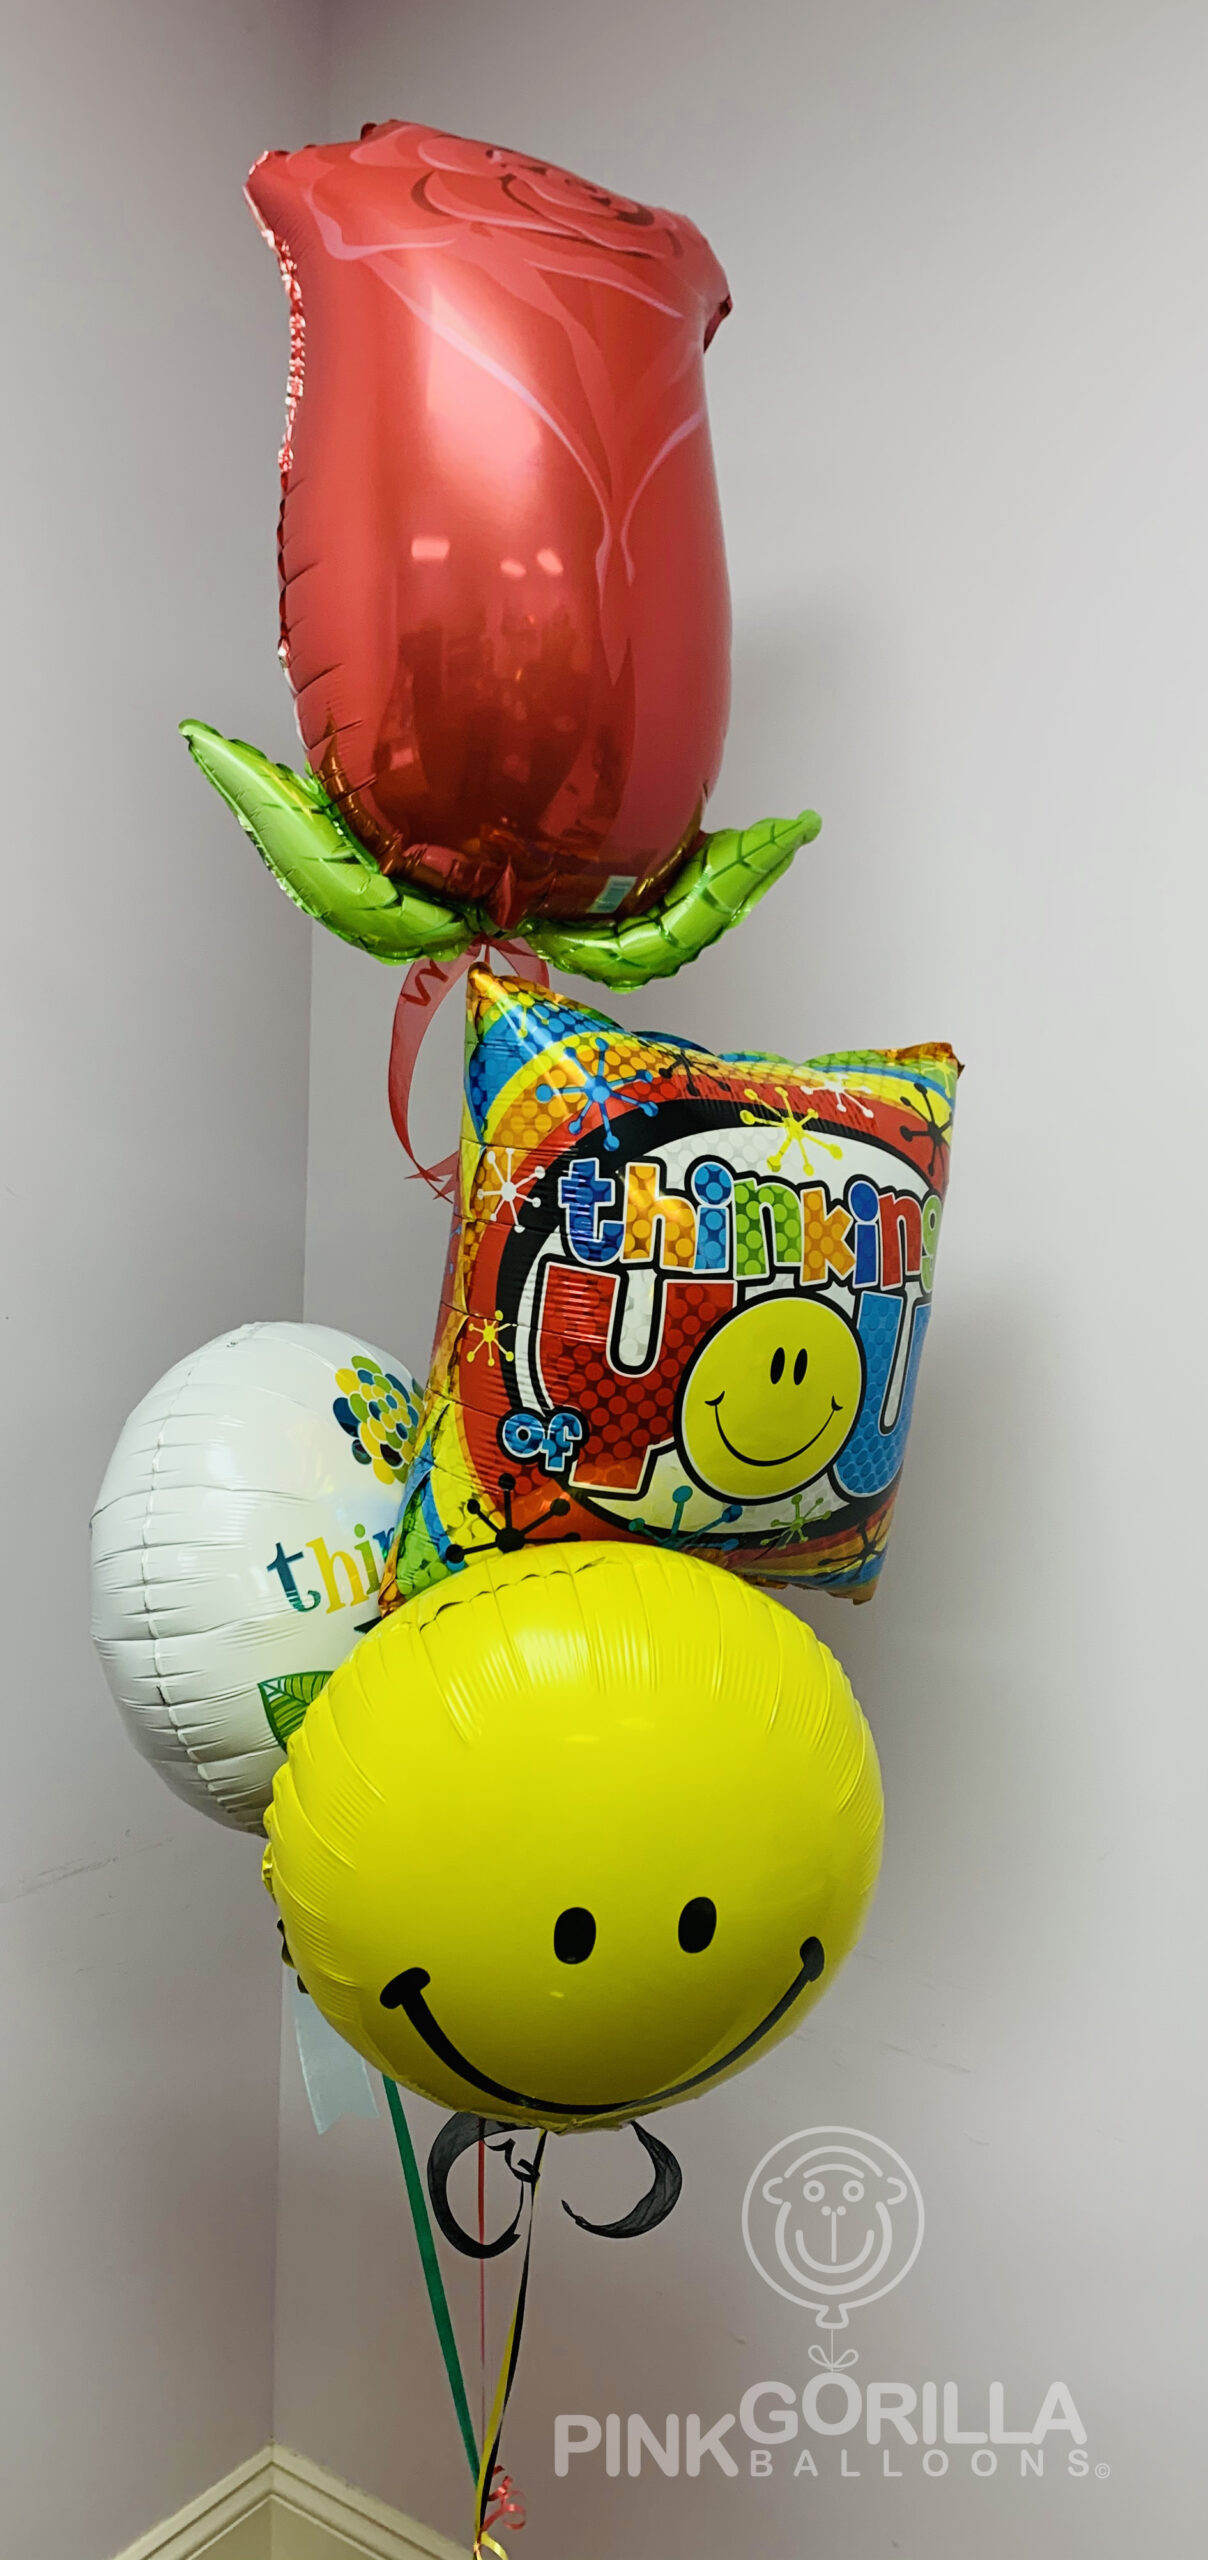 THINKING OF YOU BALLOONS-ALL MYLAR